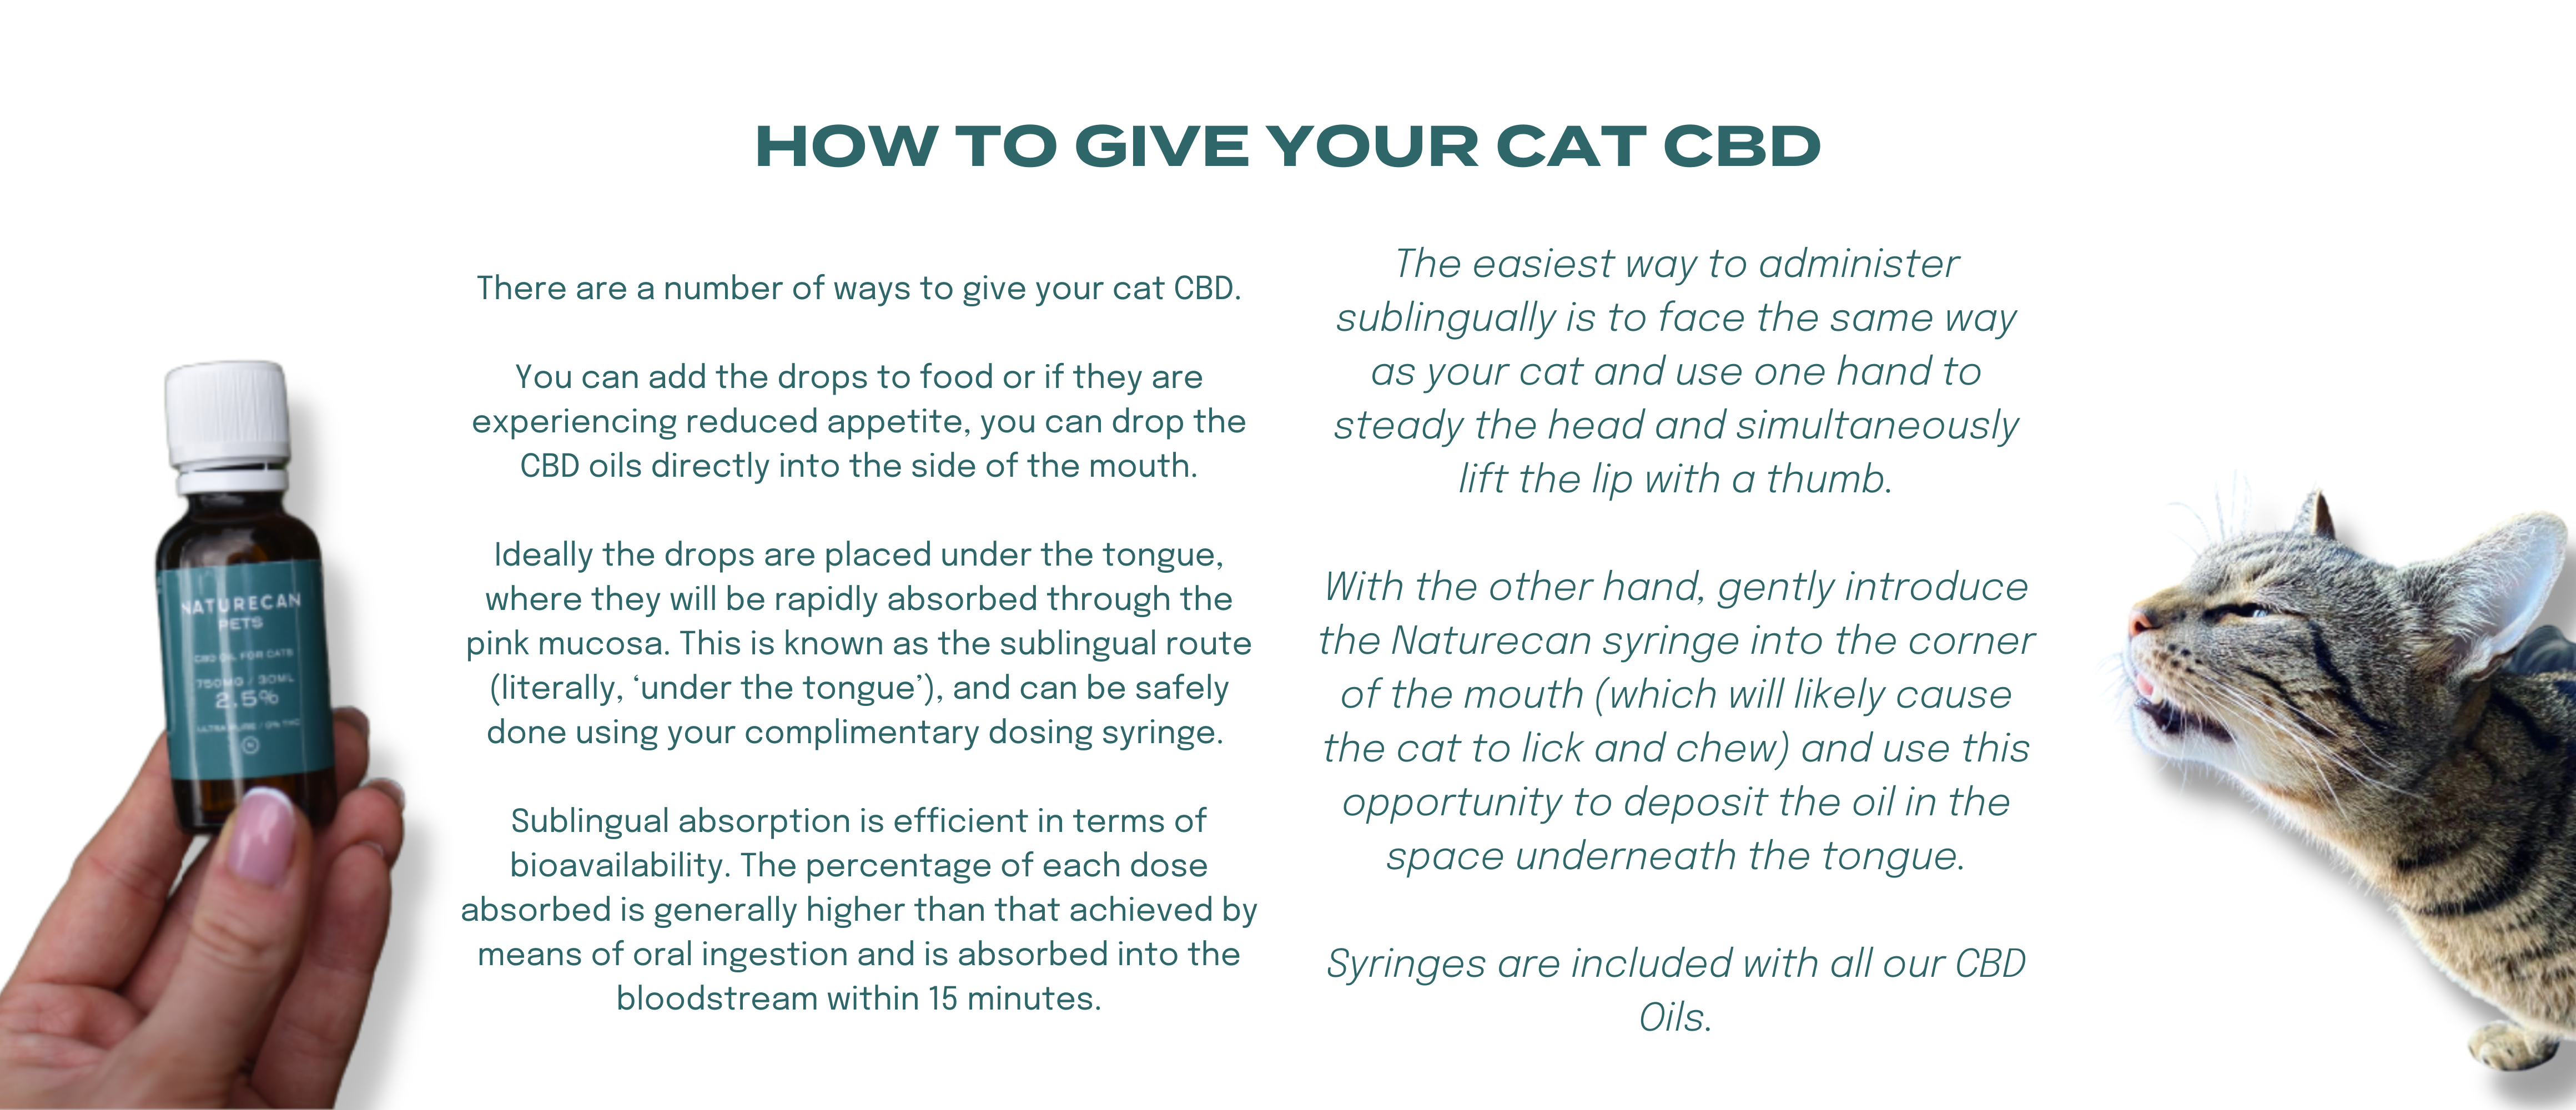 How to give your cat CBD oil 